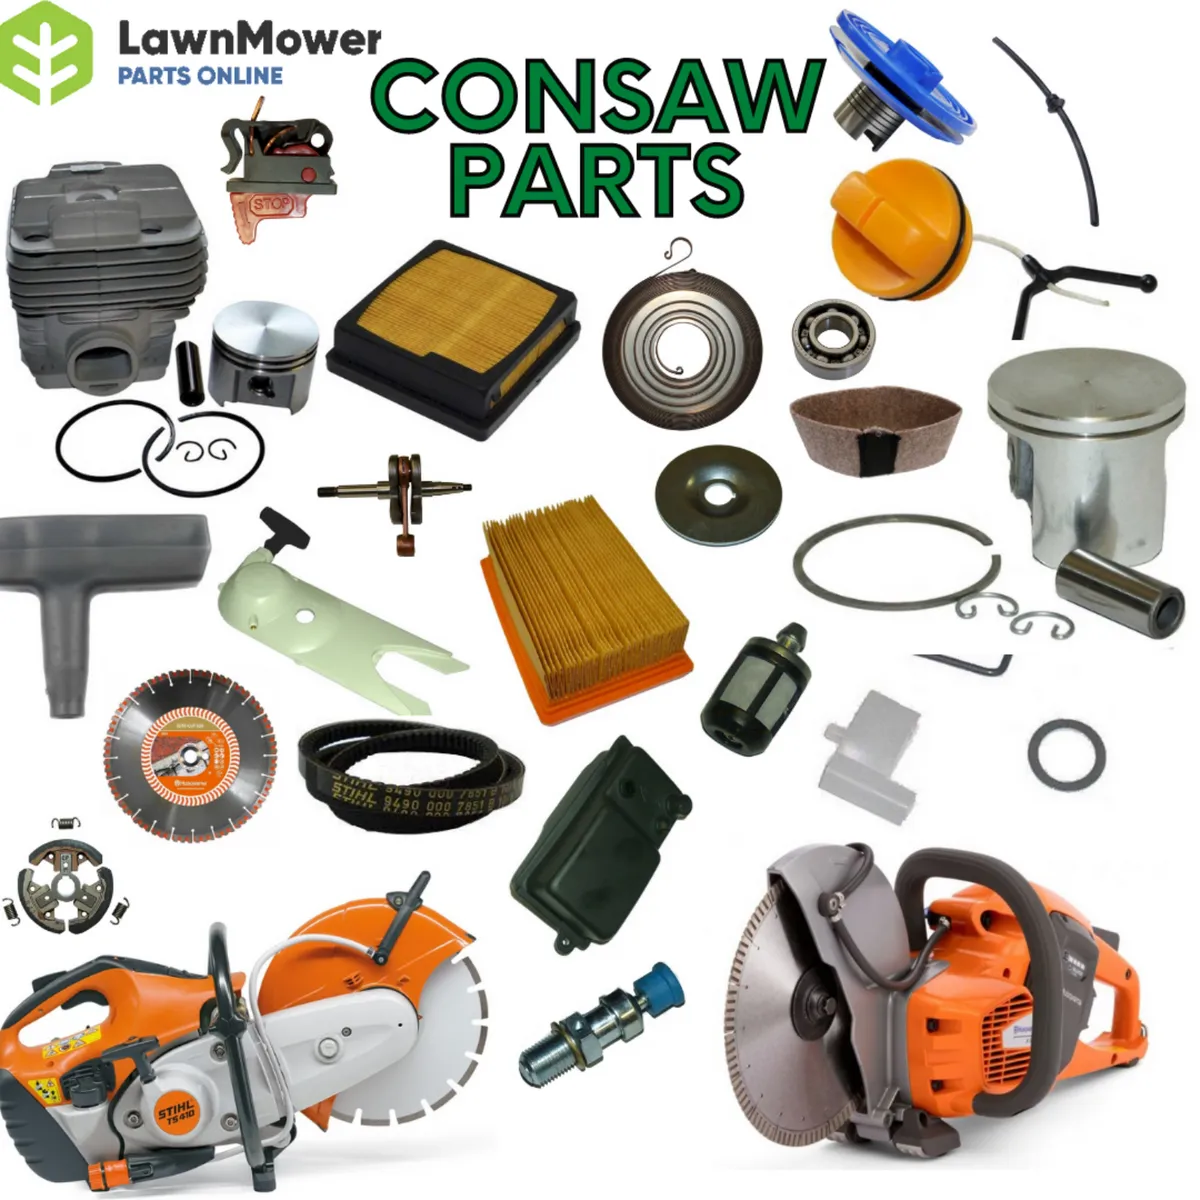 Consaw Parts - FREE Delivery - Image 1